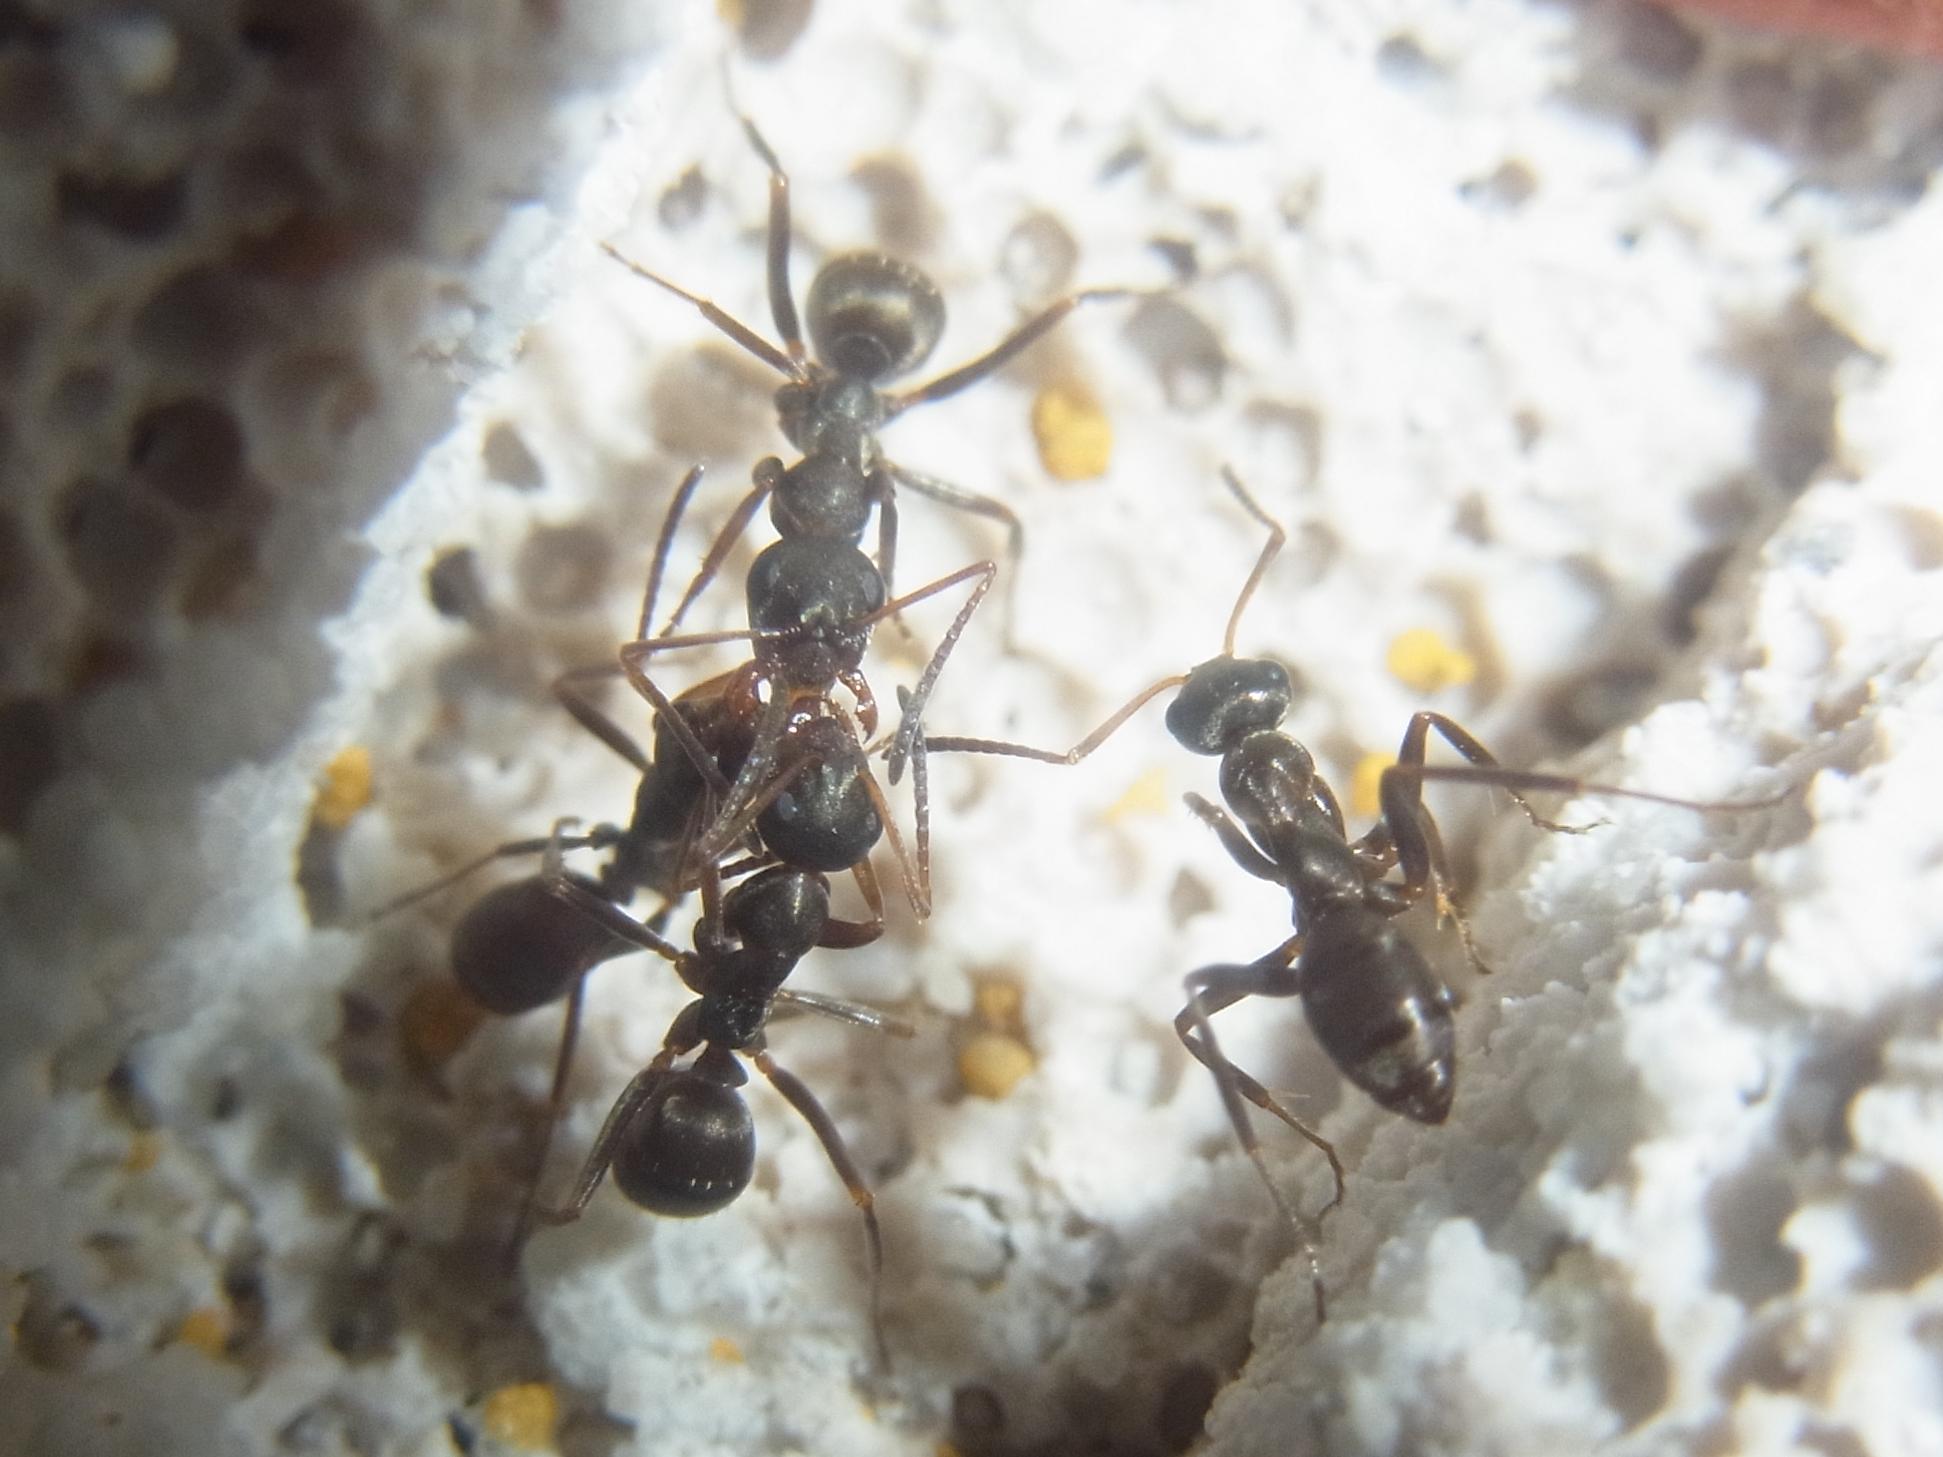 two large sized ants standing near some white dirt